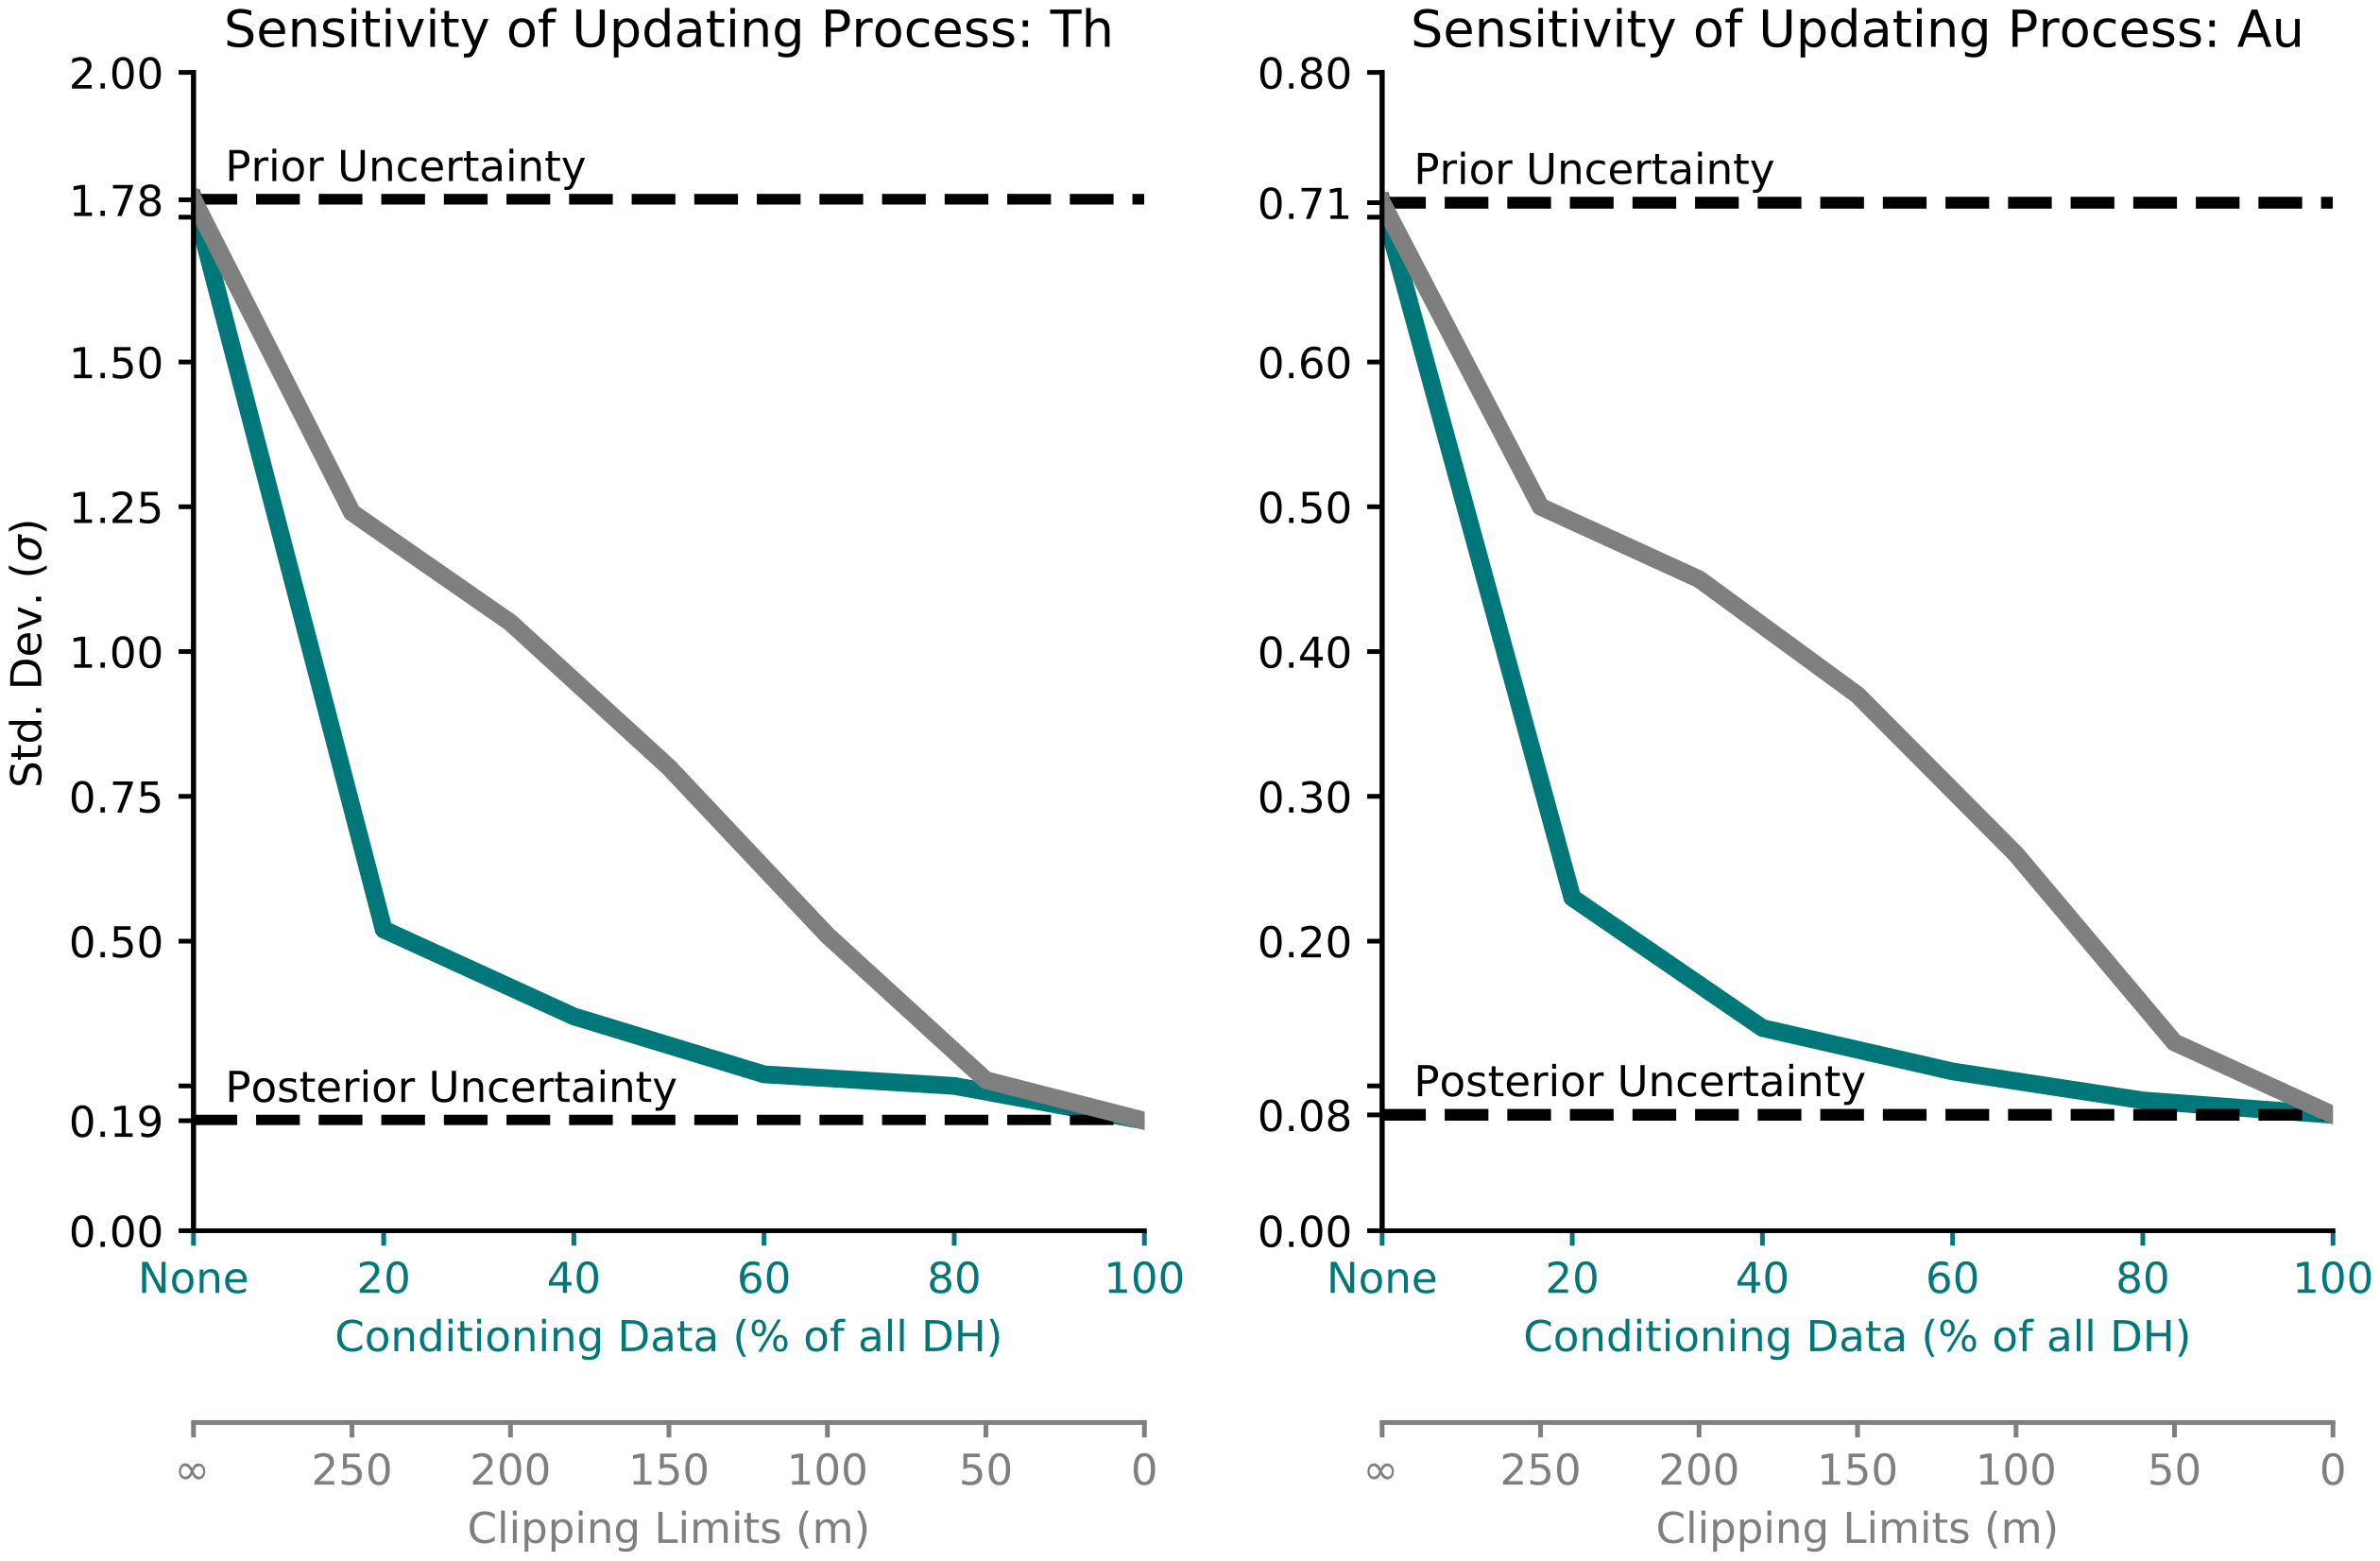 Figure 7: Sensitivity of updating the prior parameter uncertainty considering conditioning data (green line) and clipping limits (gray line).